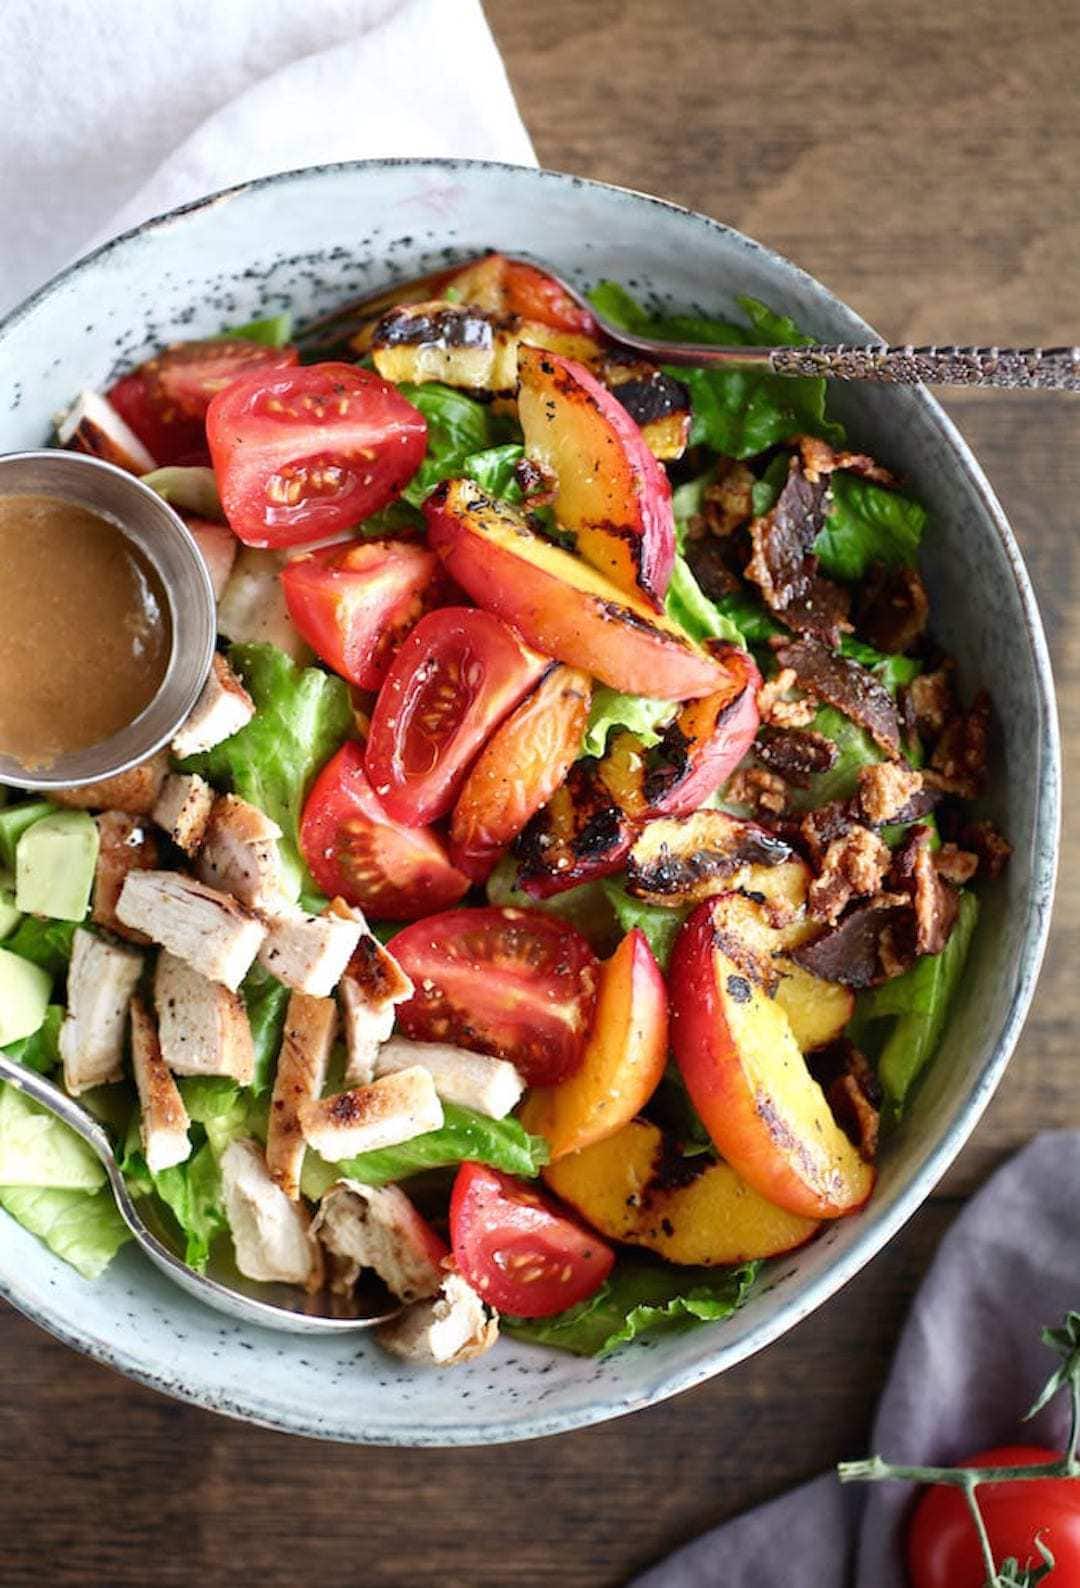 large bowl of salad with grilled chicken and nectarine